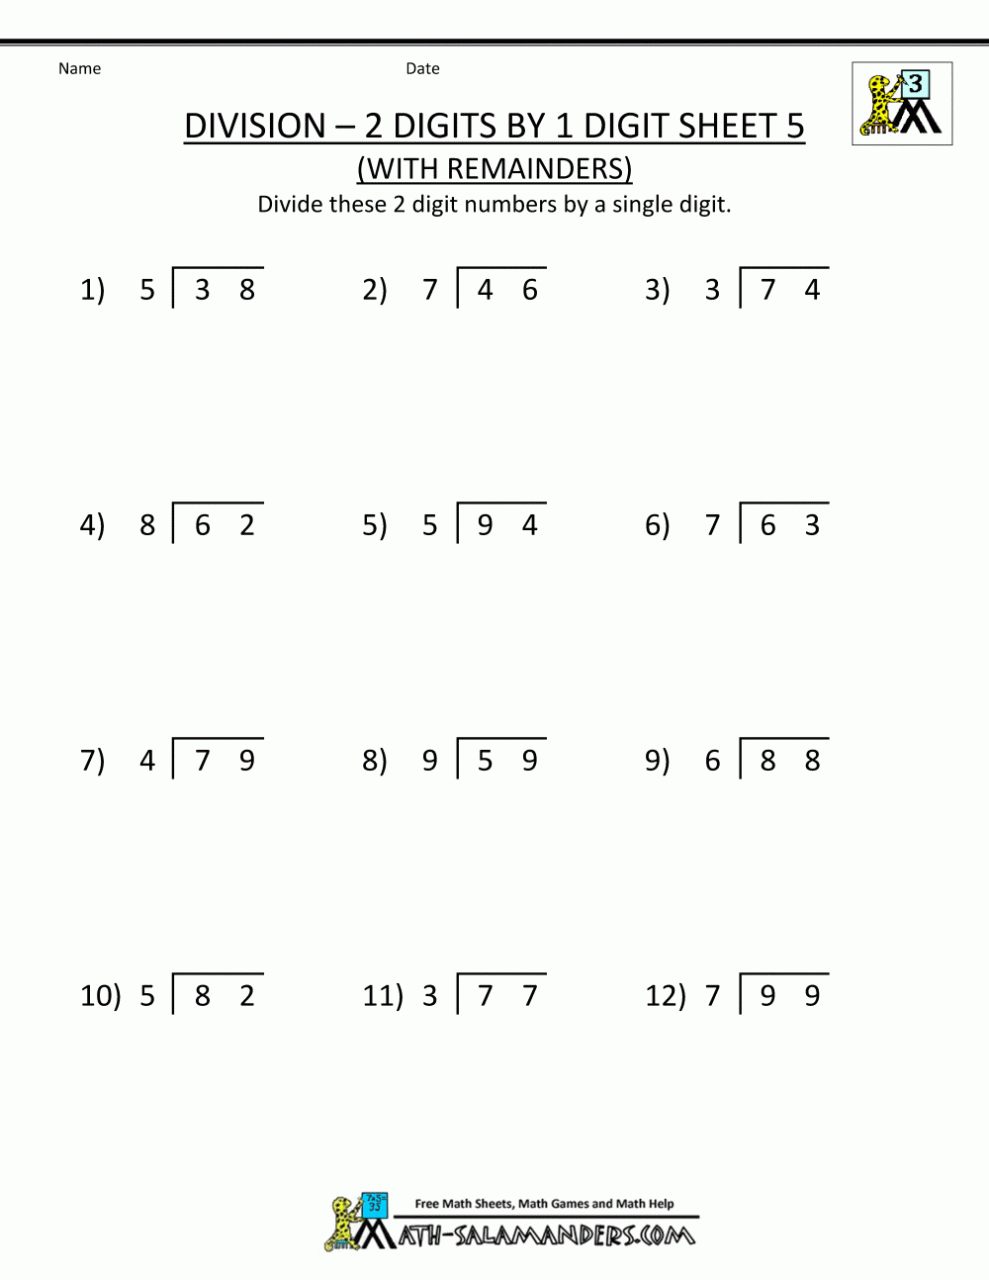 Division With Remainders Worksheet With Answers